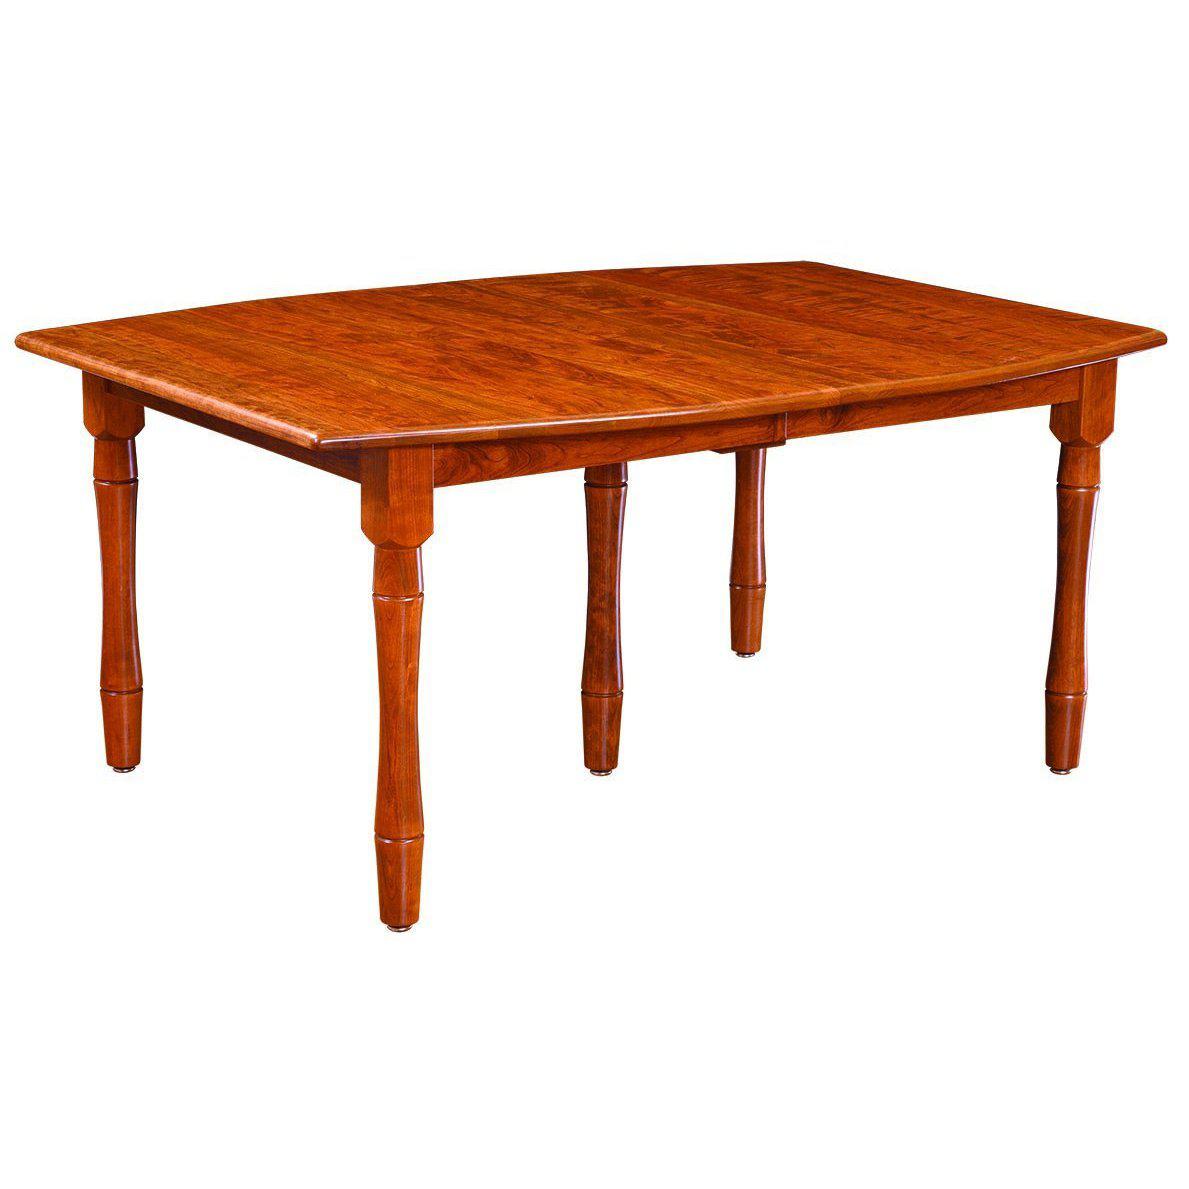 Amish Concord Leg Table -The Amish House